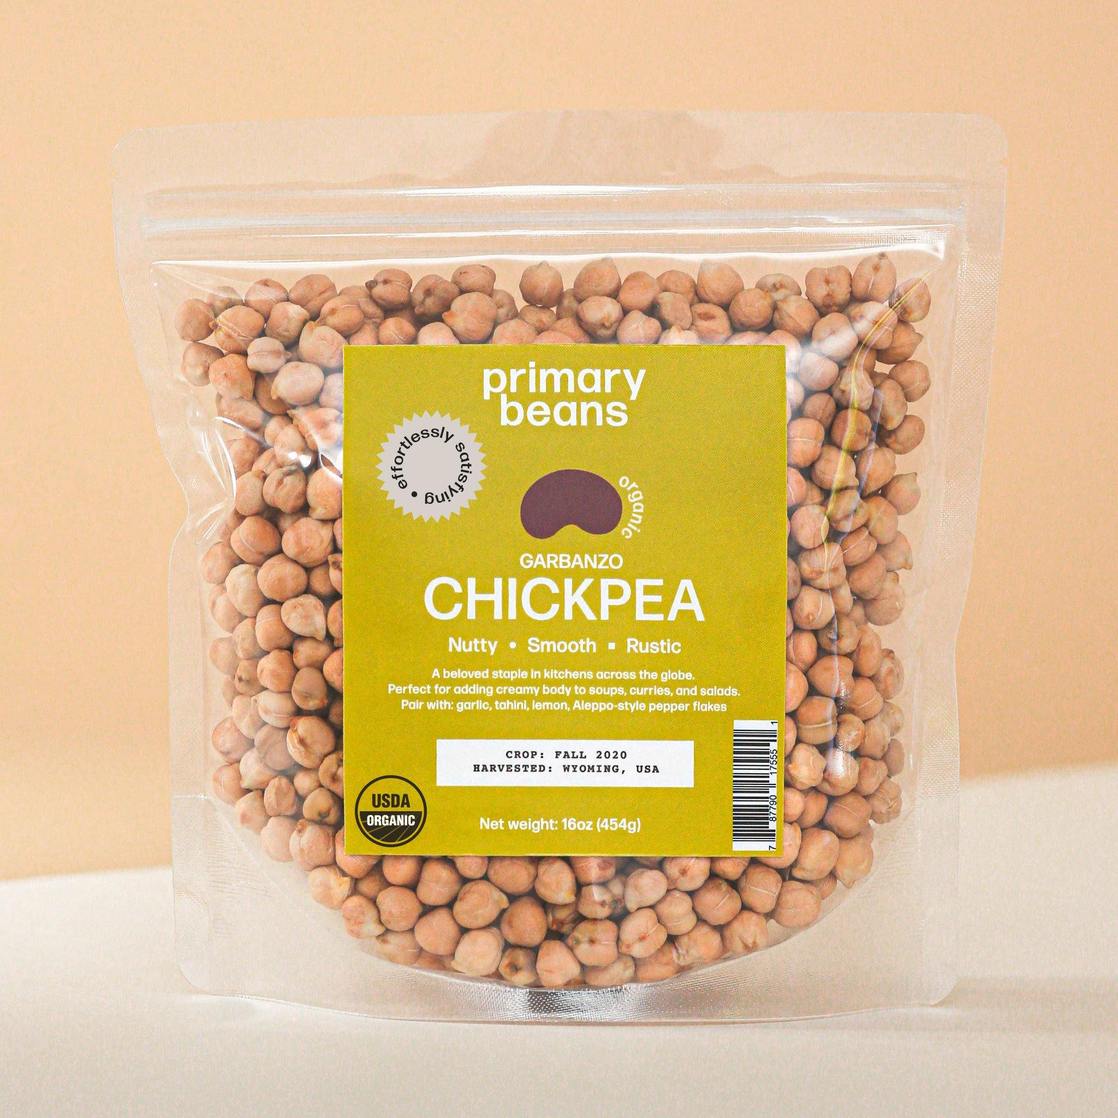 Primary Beans, Chickpea